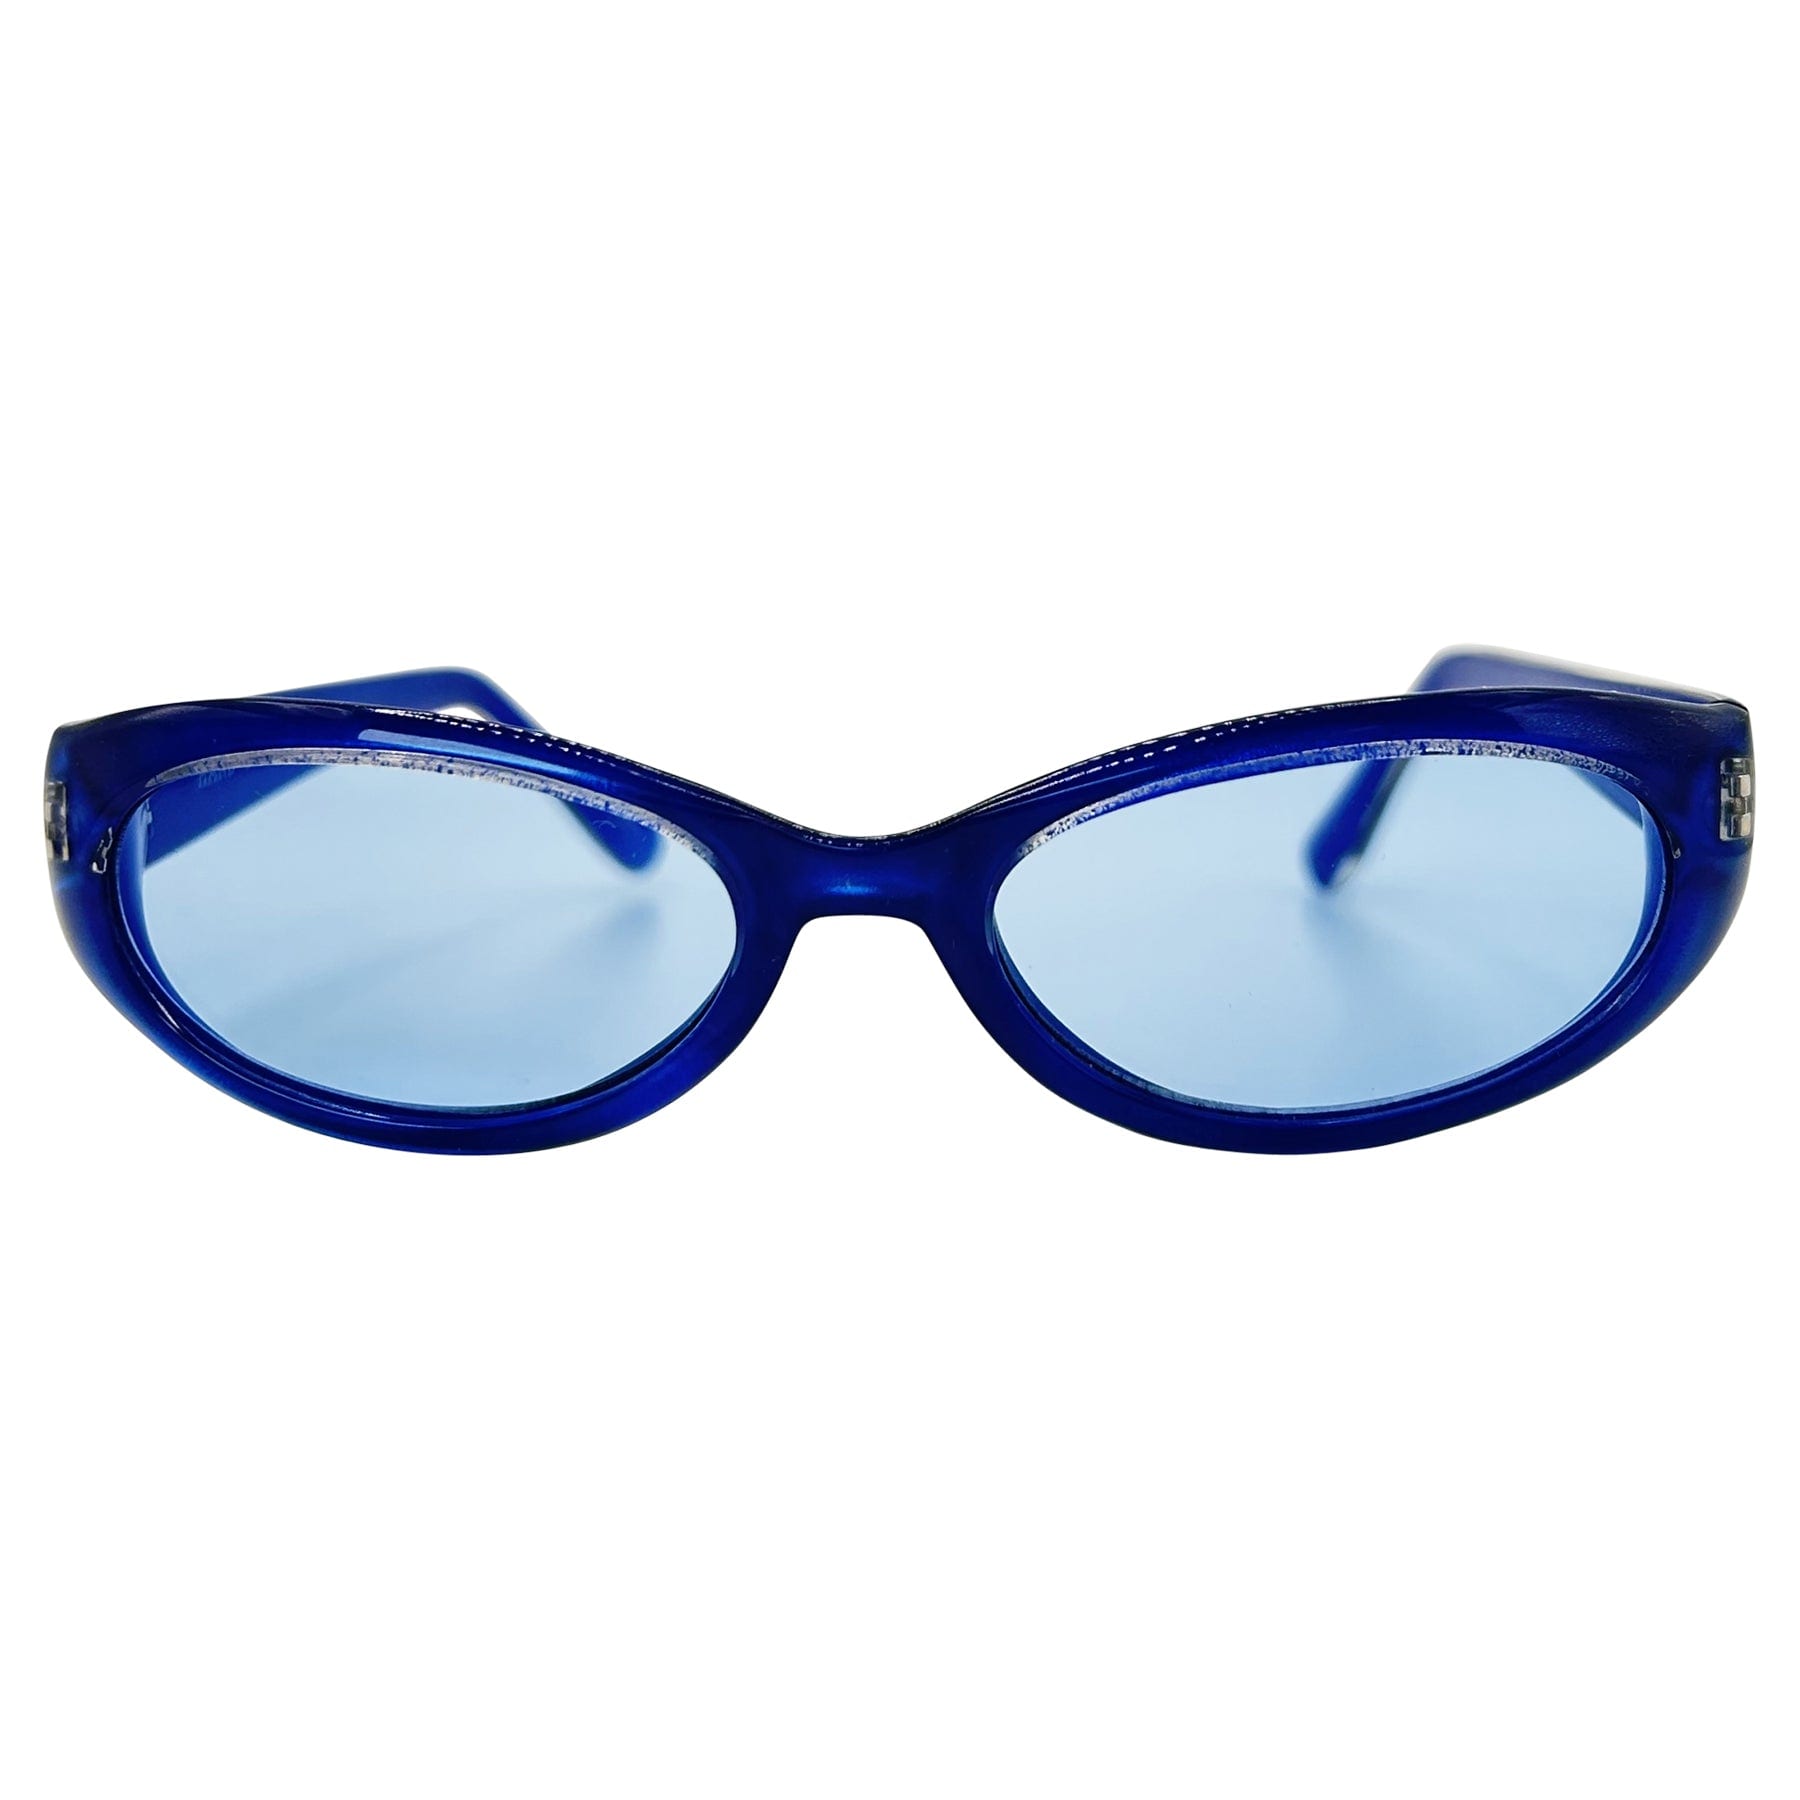 blue sunglasses womens and unisex with a 90s style frame 